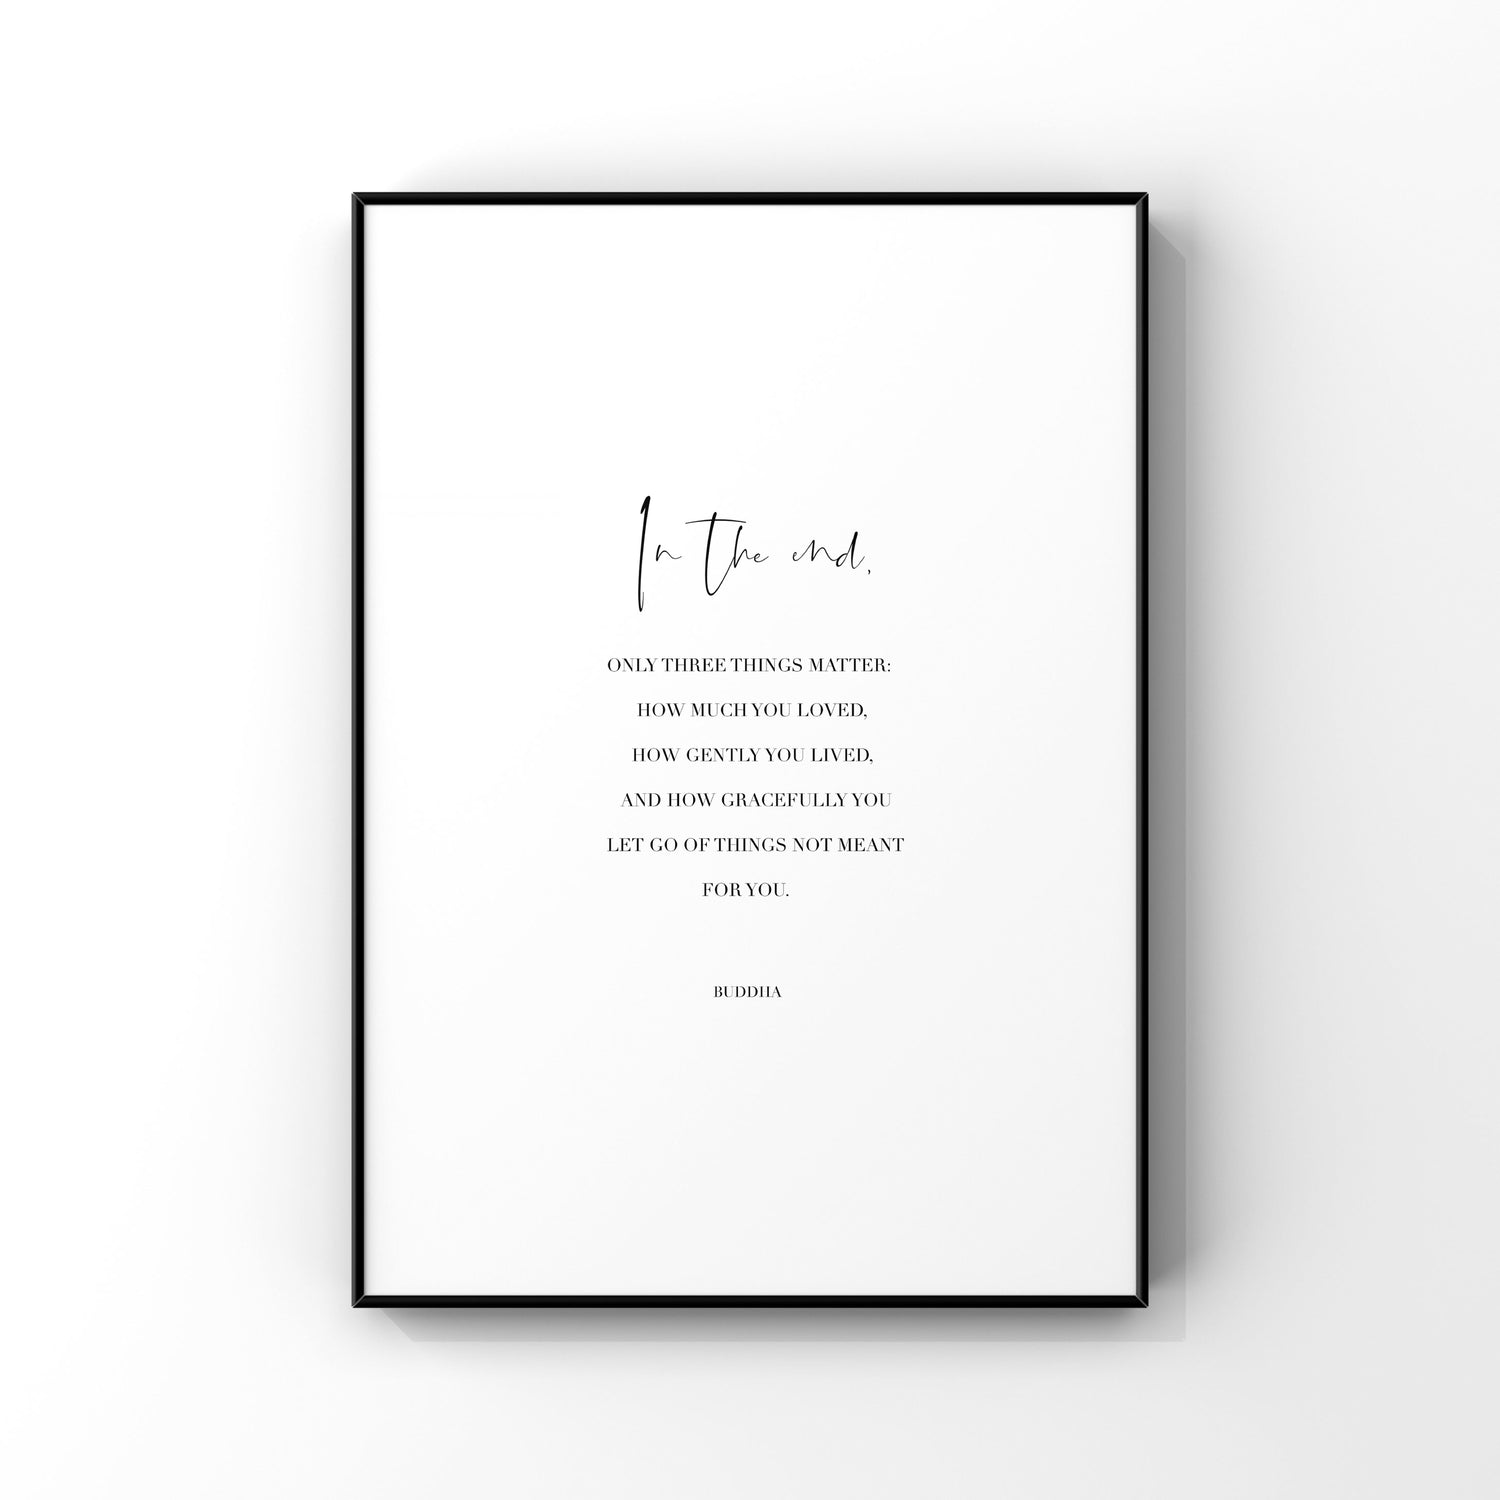 INSPIRATIONAL & QUOTE PRINTS